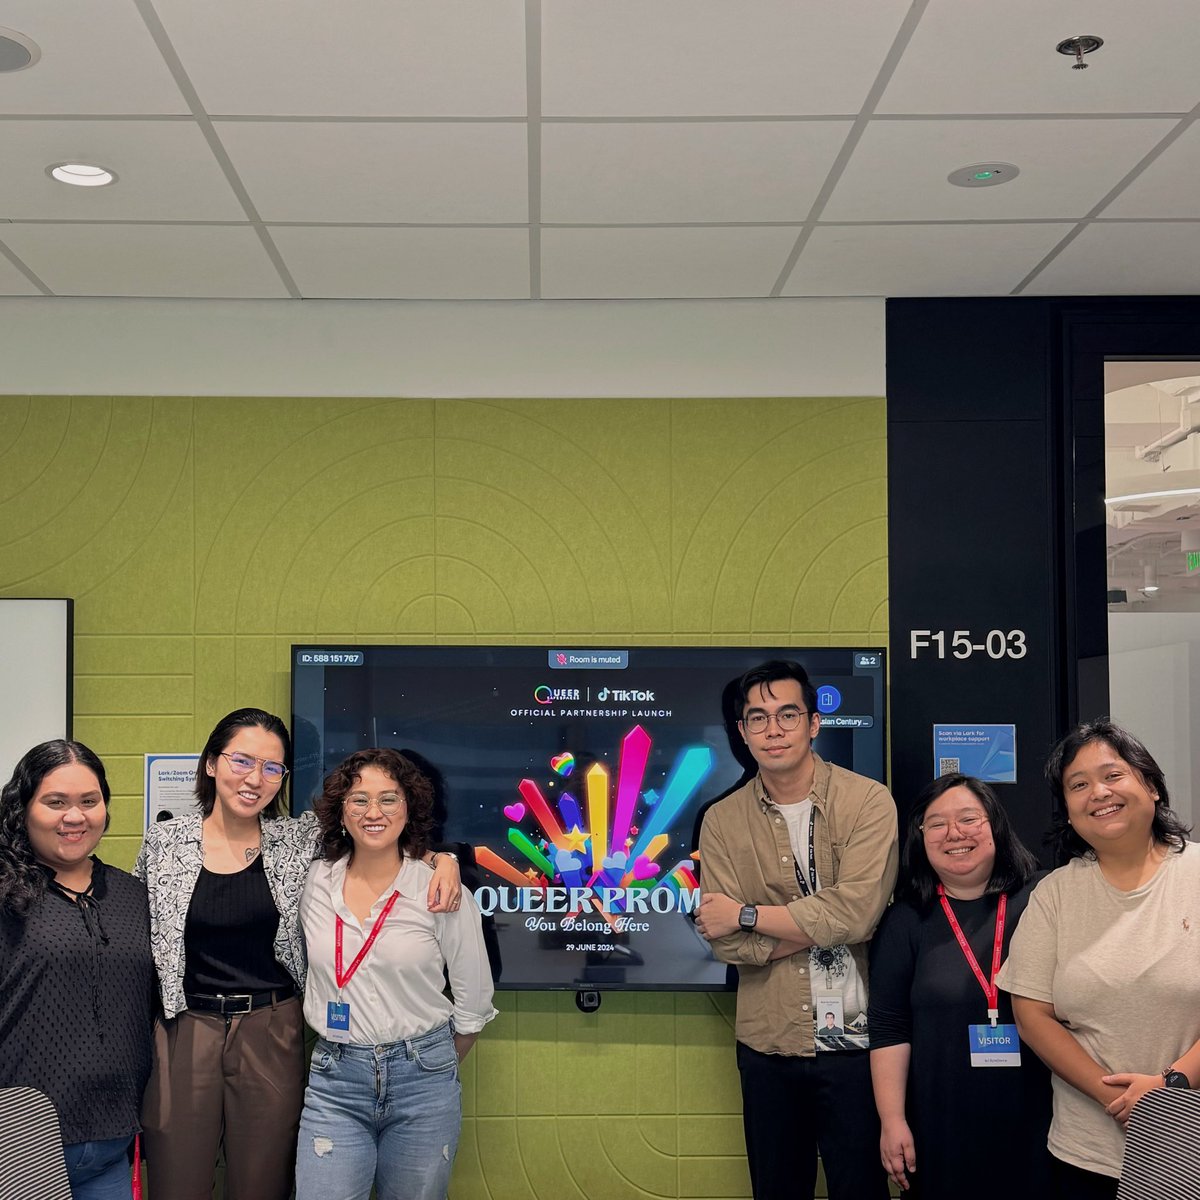 Queer Safe Spaces x TikTok Philippines 🏳️‍🌈

QSS officially launches its advocacy partnership with @TikTokPH as the co-presentor for this year’s Queer Prom PH!

PS. We’ll post a call for volunteers tomorrow so stay tuned! ✨

#QueerPromPH #ForYourPride #QueerSafeSpaces